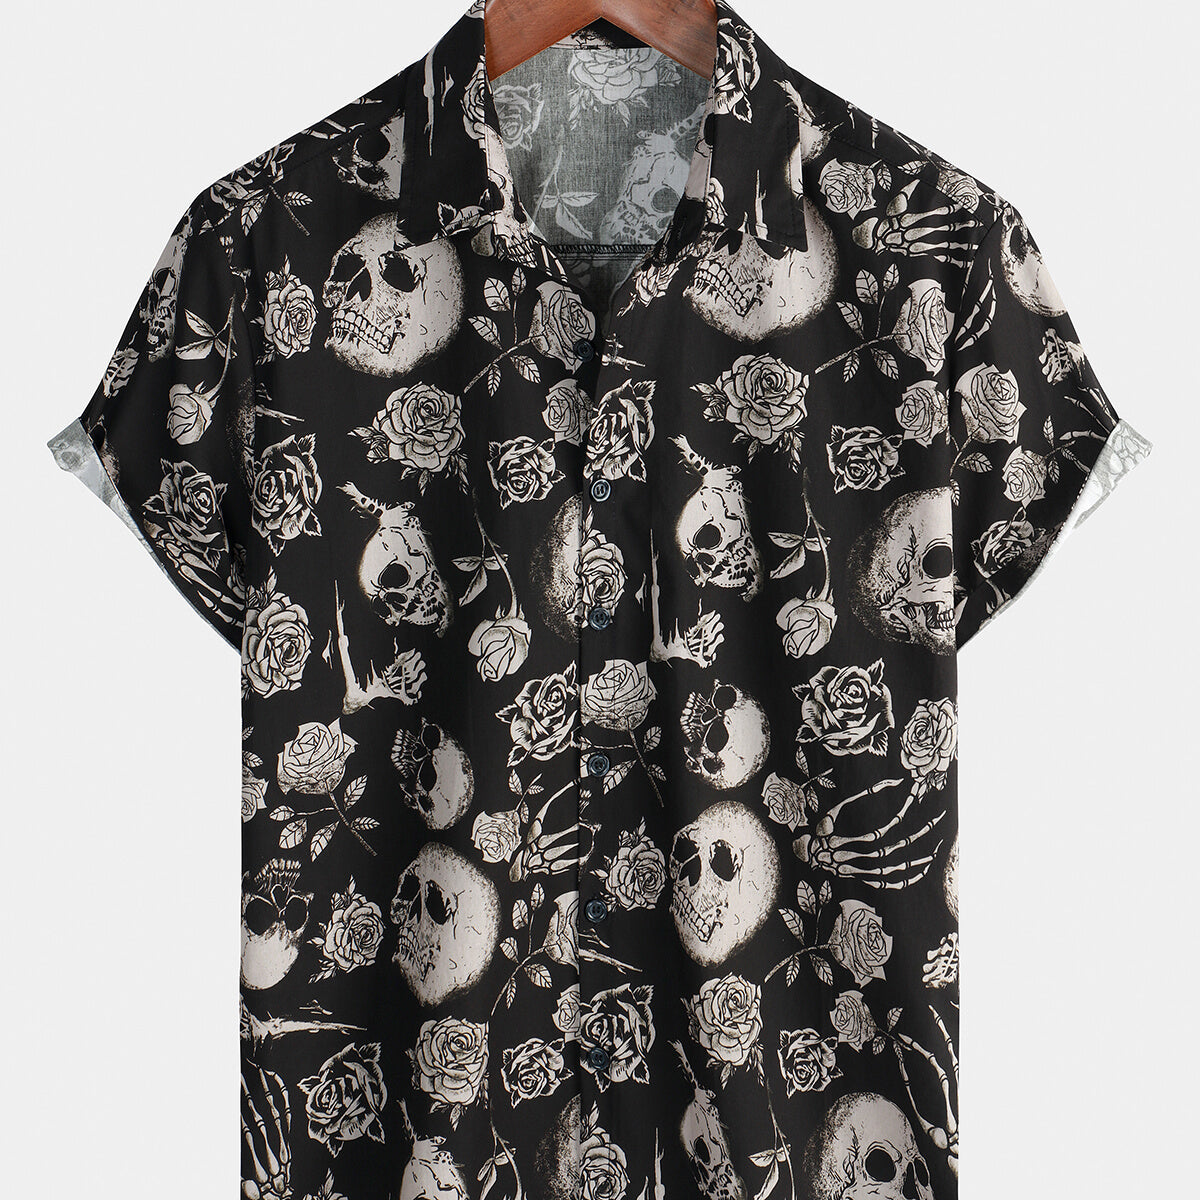 Men's Skull Rose Floral Punk Rock and Roll Cool Button Up Shirt